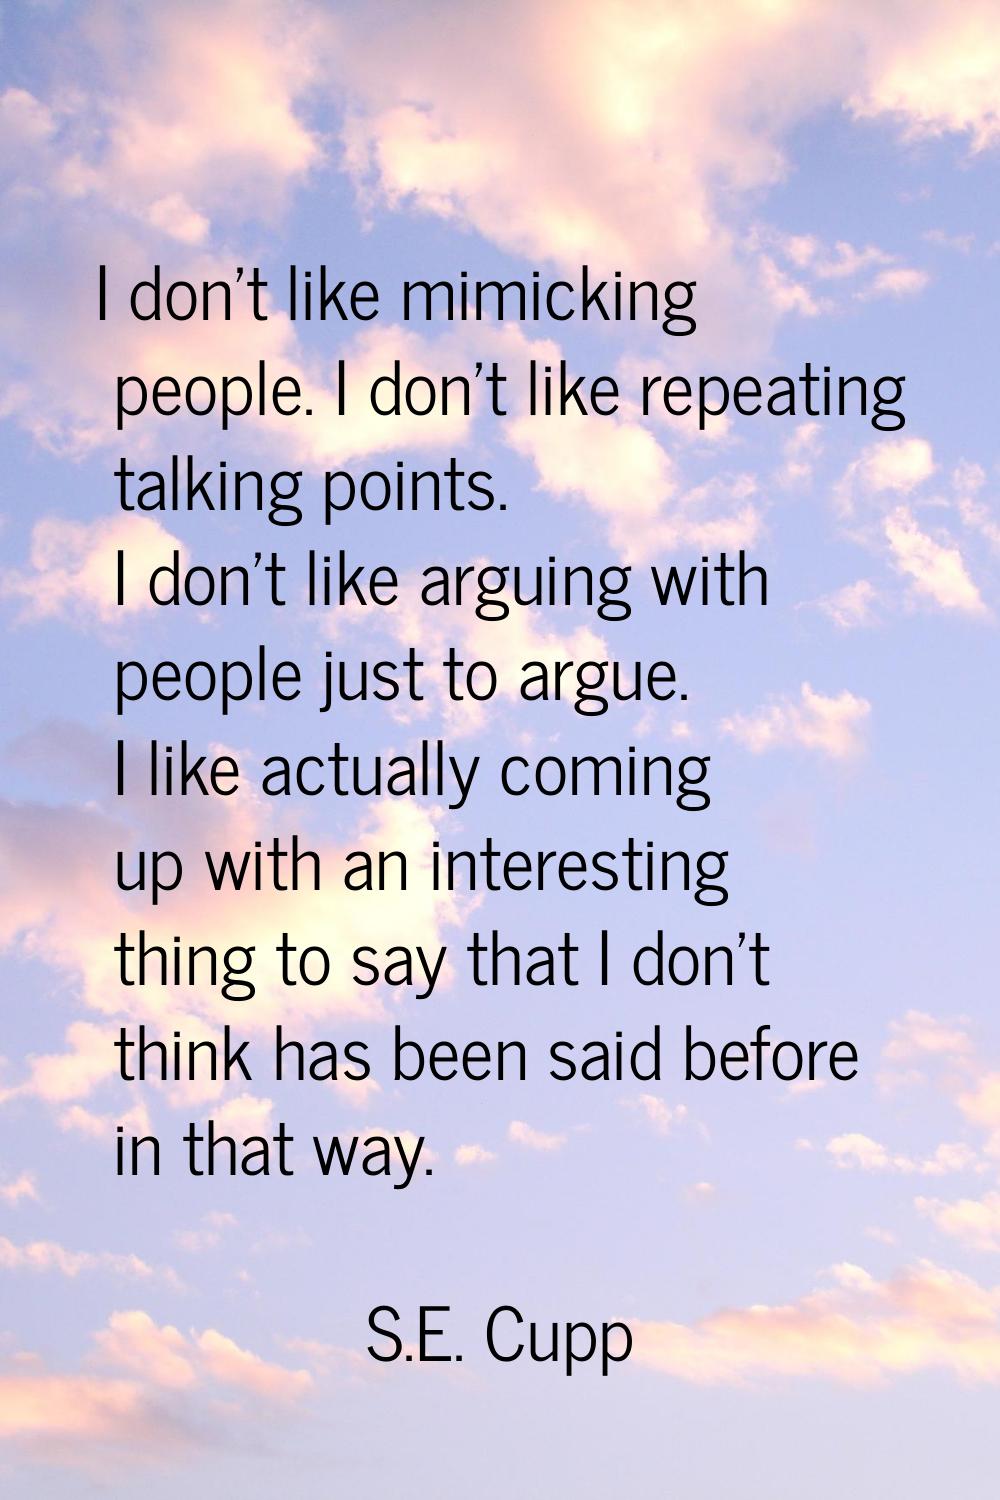 I don’t like mimicking people. I don’t like repeating talking points. I don’t like arguing with peo